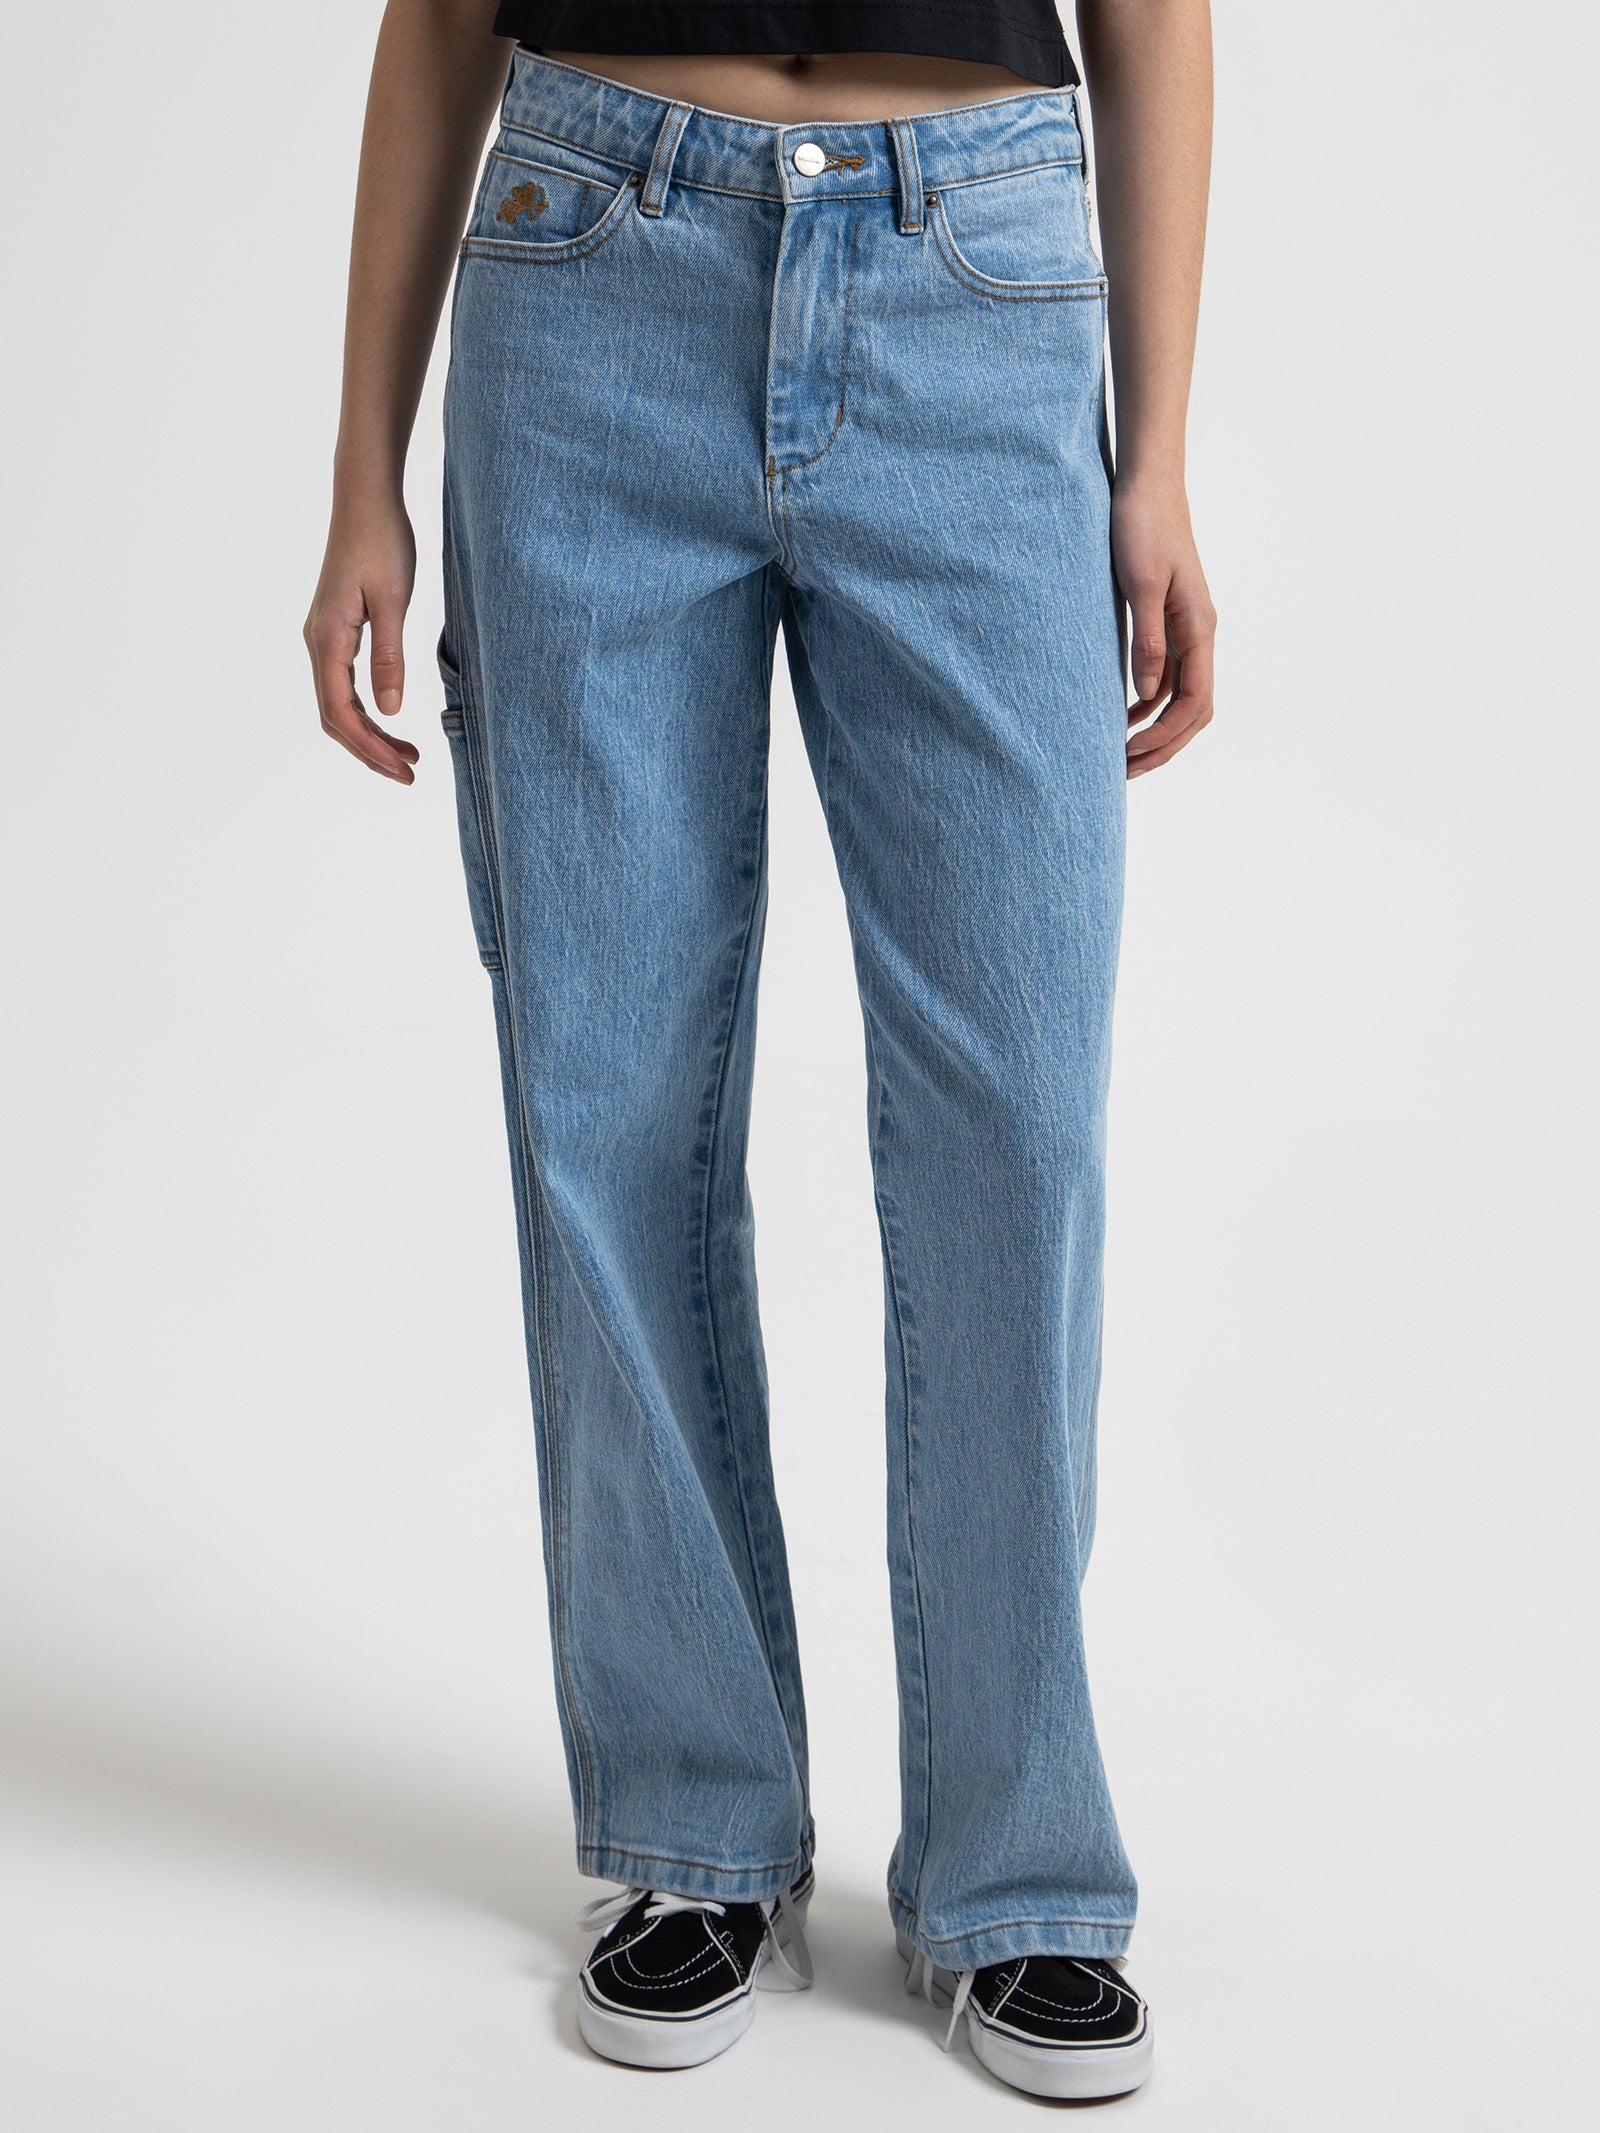 Ponder Carpenter Baggy Jeans in Electric Blue Fade - Glue Store